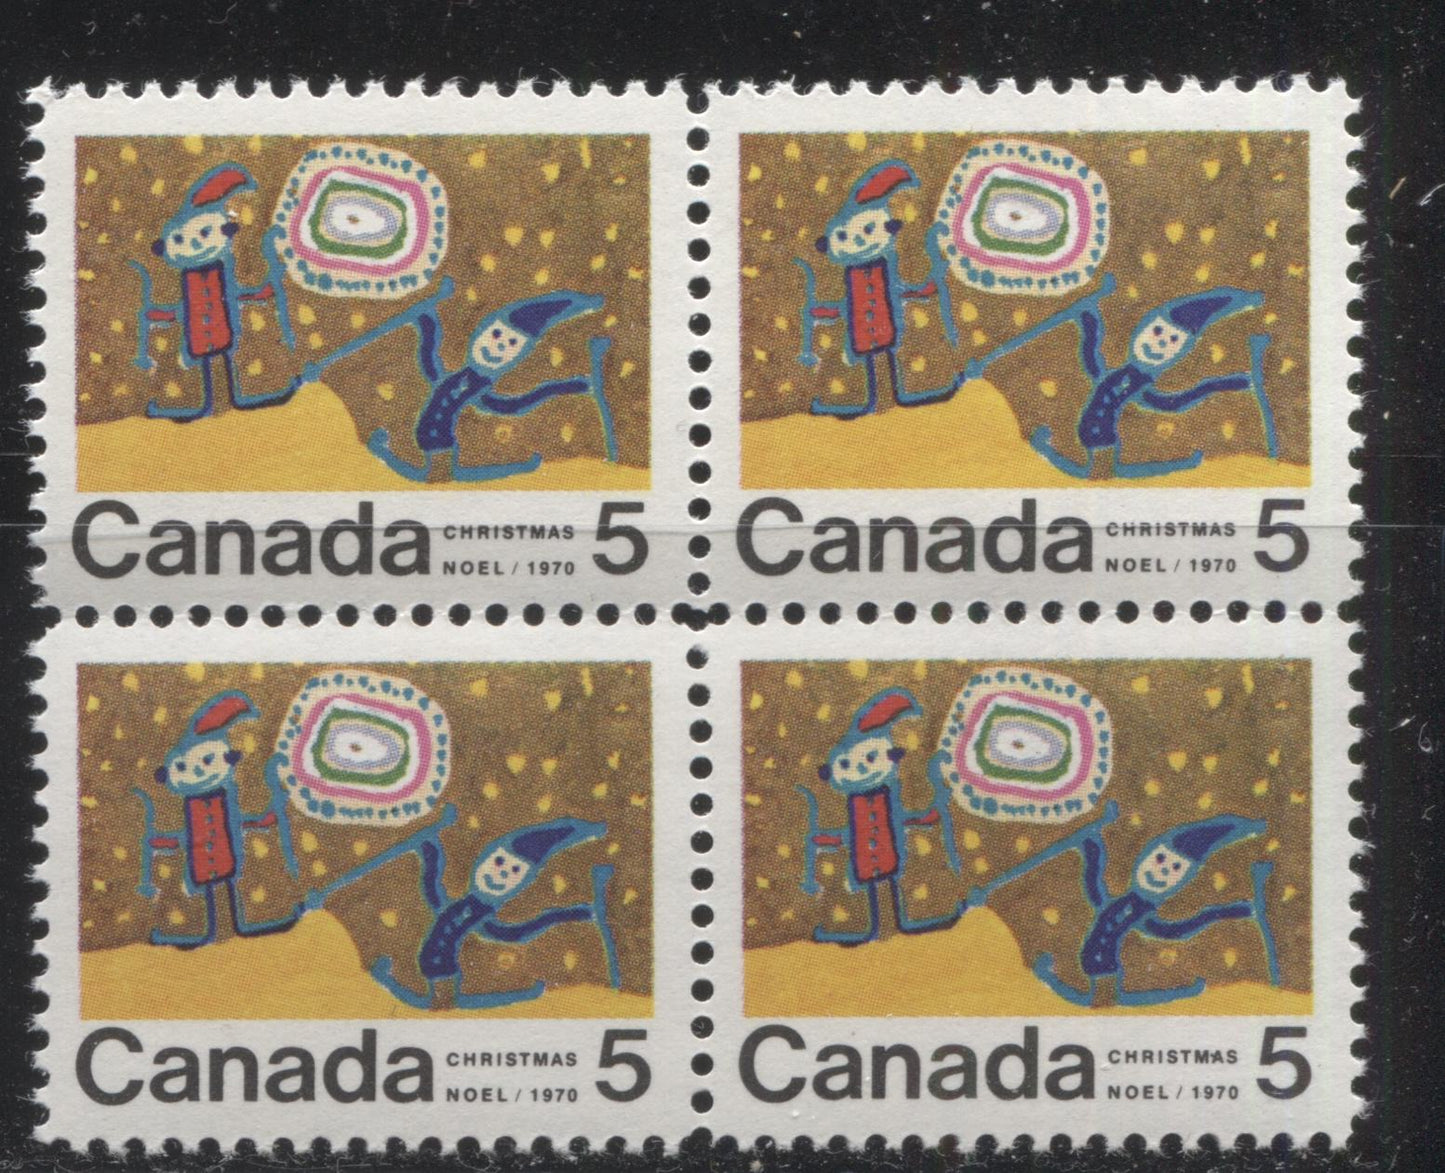 Lot 116 Canada #522i 5c Multicoloured Children Skiing, 1970 Christmas Issue, a VFNH Centre Block of 4 on HB10 Ribbed Paper, With Dot Between "MA" of "Christmas" on LR Stamp, Perf. 11.85 x 11.95